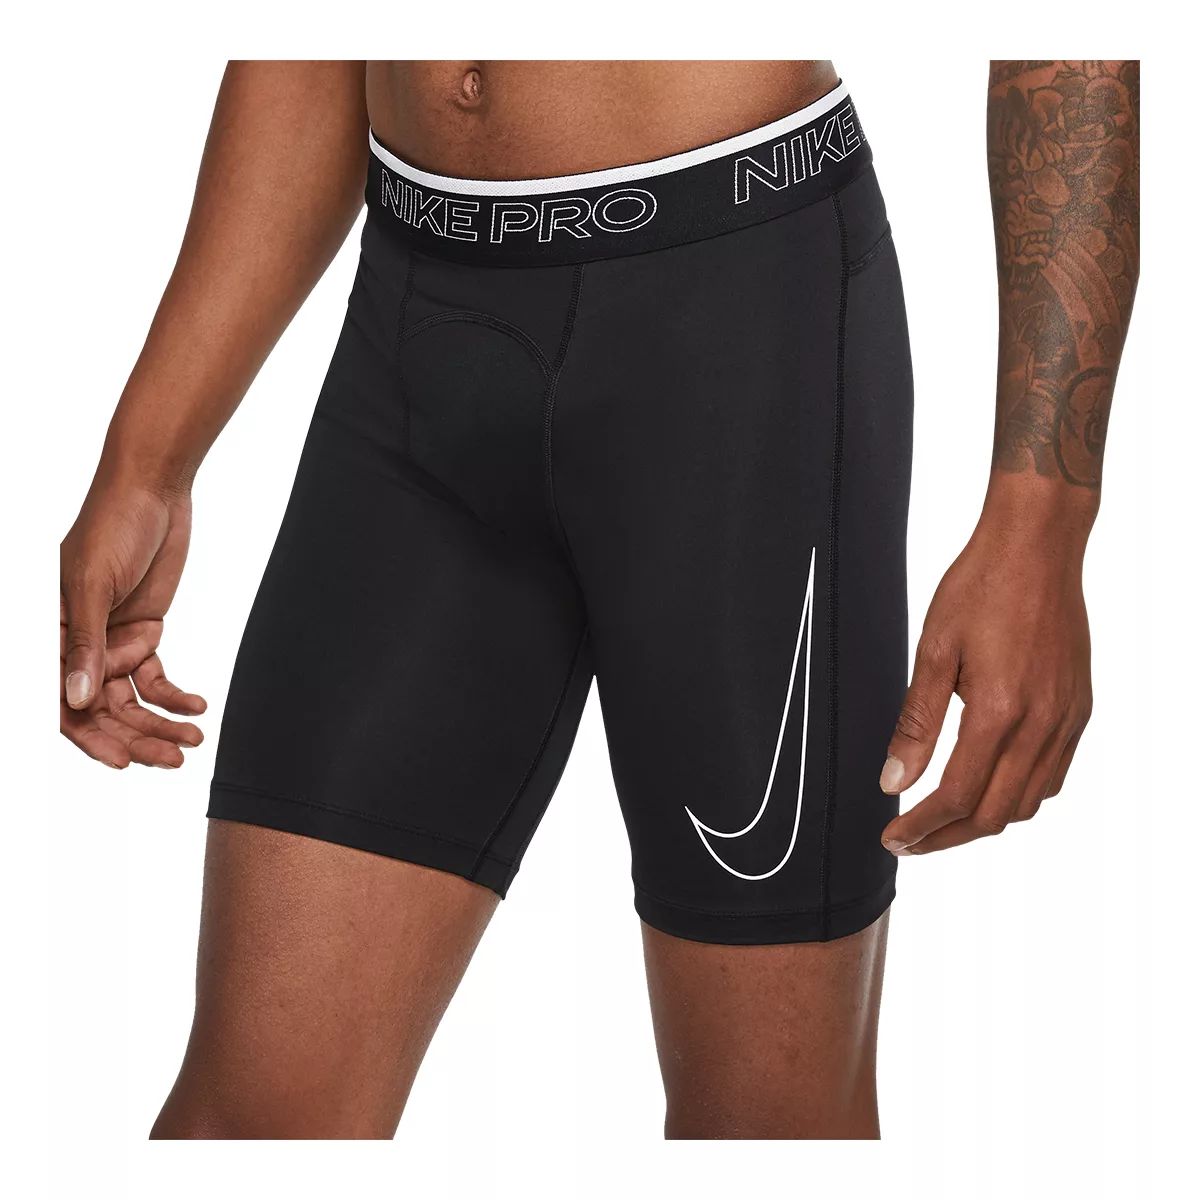 https://media-www.atmosphere.ca/product/div-03-softgoods/dpt-70-athletic-clothing/sdpt-01-mens/333477212/nike-pro-drifit-compression-black-white-s--103a8f2d-f07e-4c44-83b4-43e8e7cad948-jpgrendition.jpg?imdensity=1&imwidth=1244&impolicy=mZoom